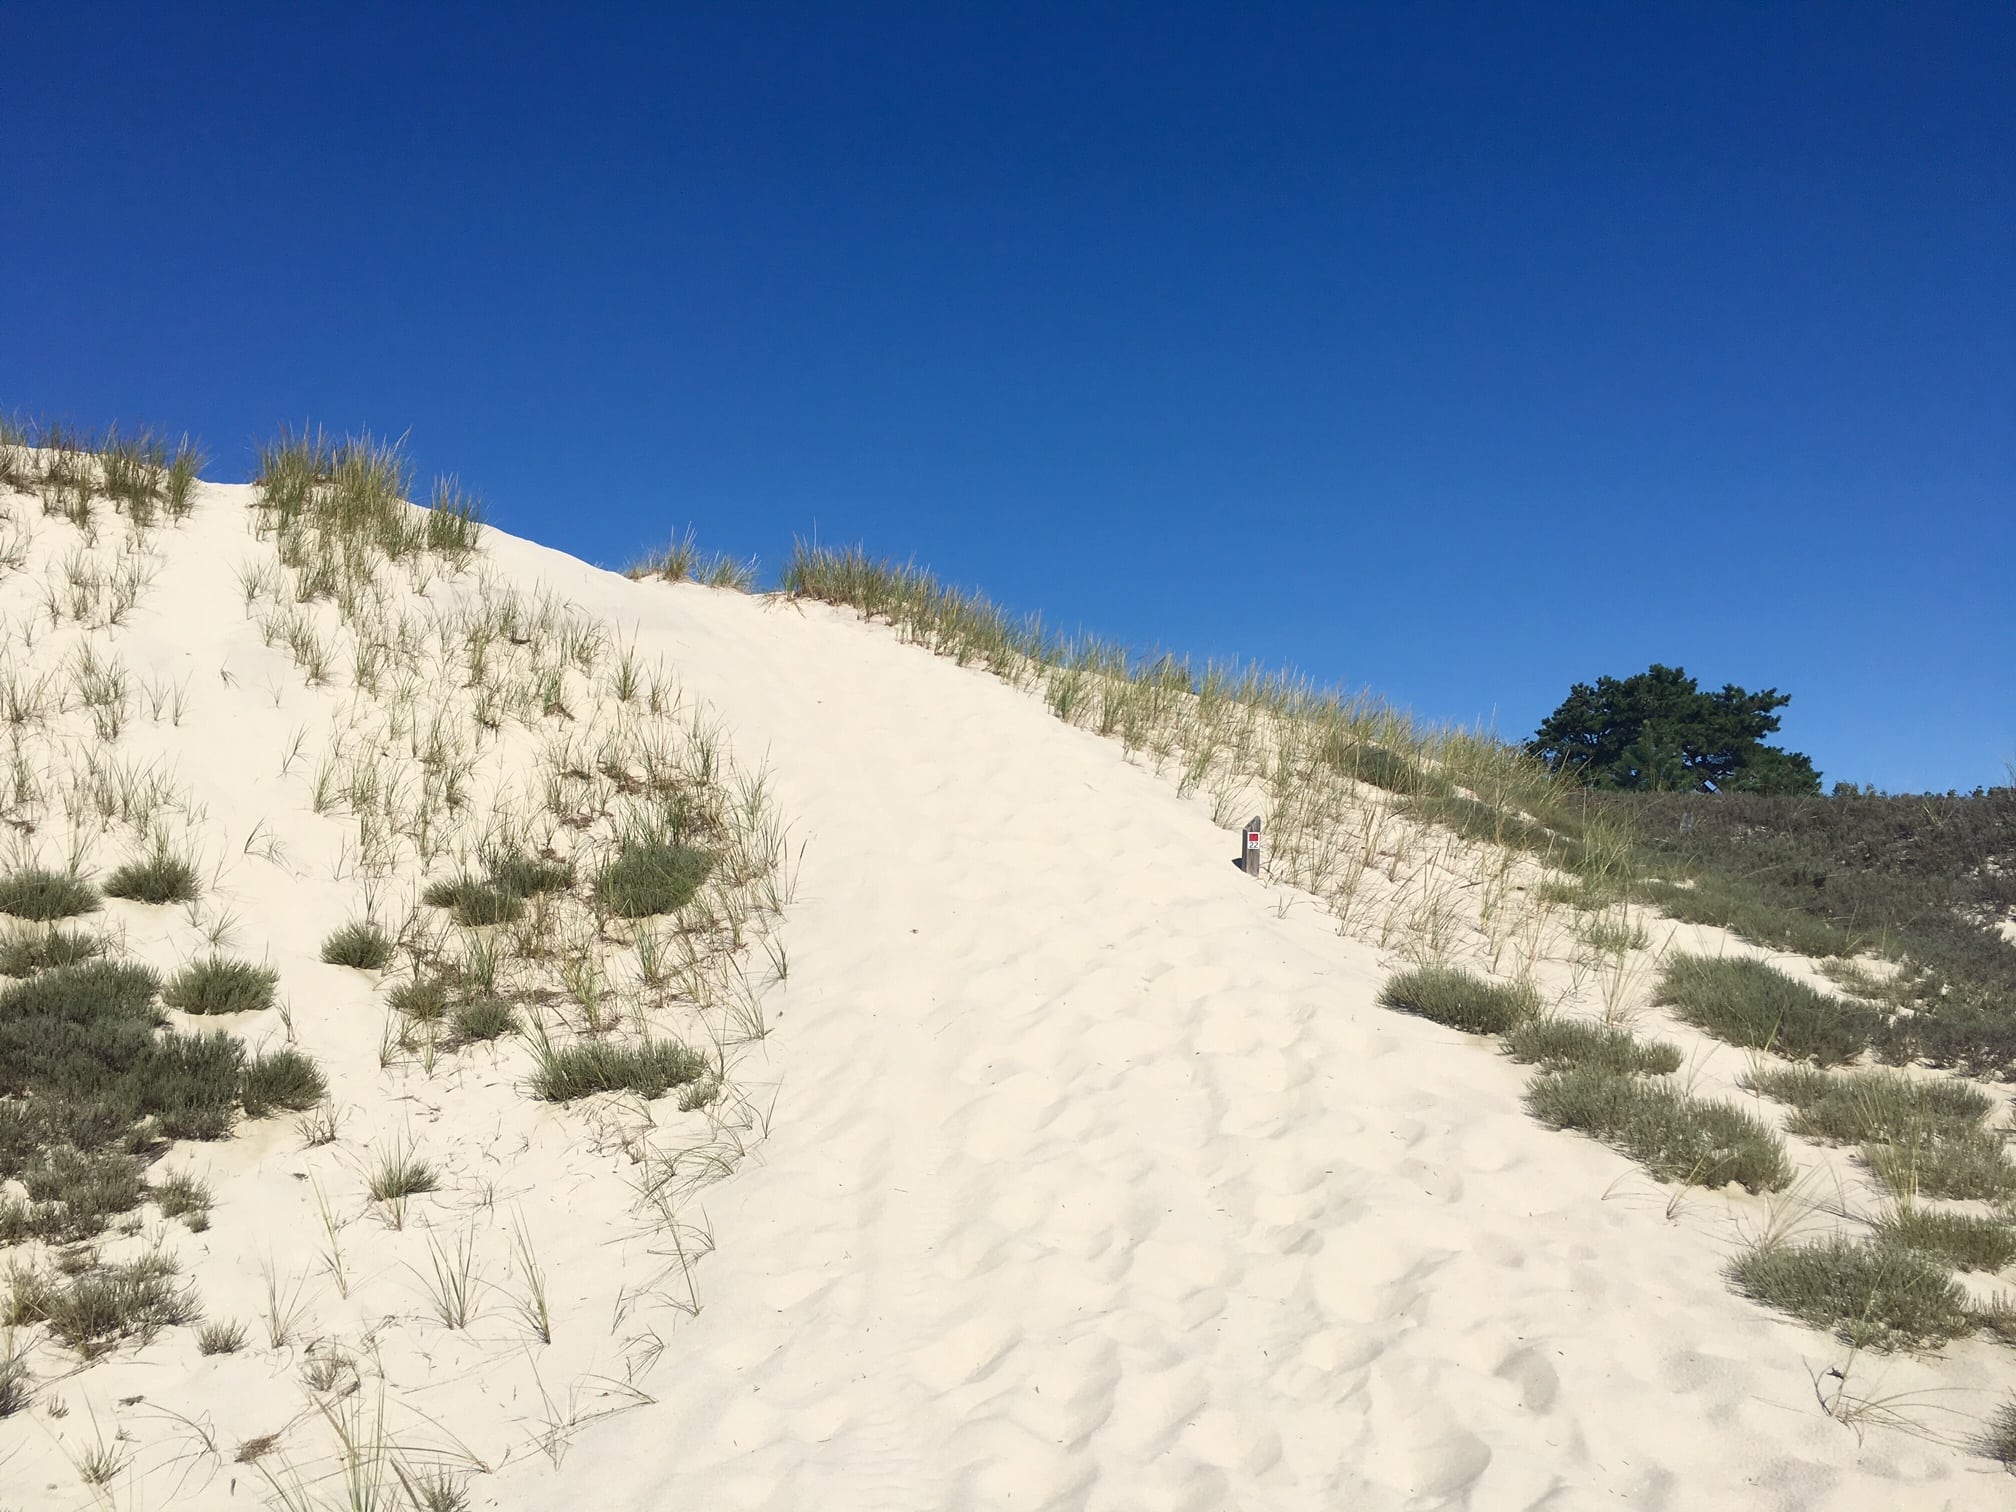 At post 22, you get to walk down a dune. After a lifetime of having it drummed into me that I must never EVER walk on the dunes, I was almost unable to do it. I dug deep, overcame mu early indoctrination, and did it.